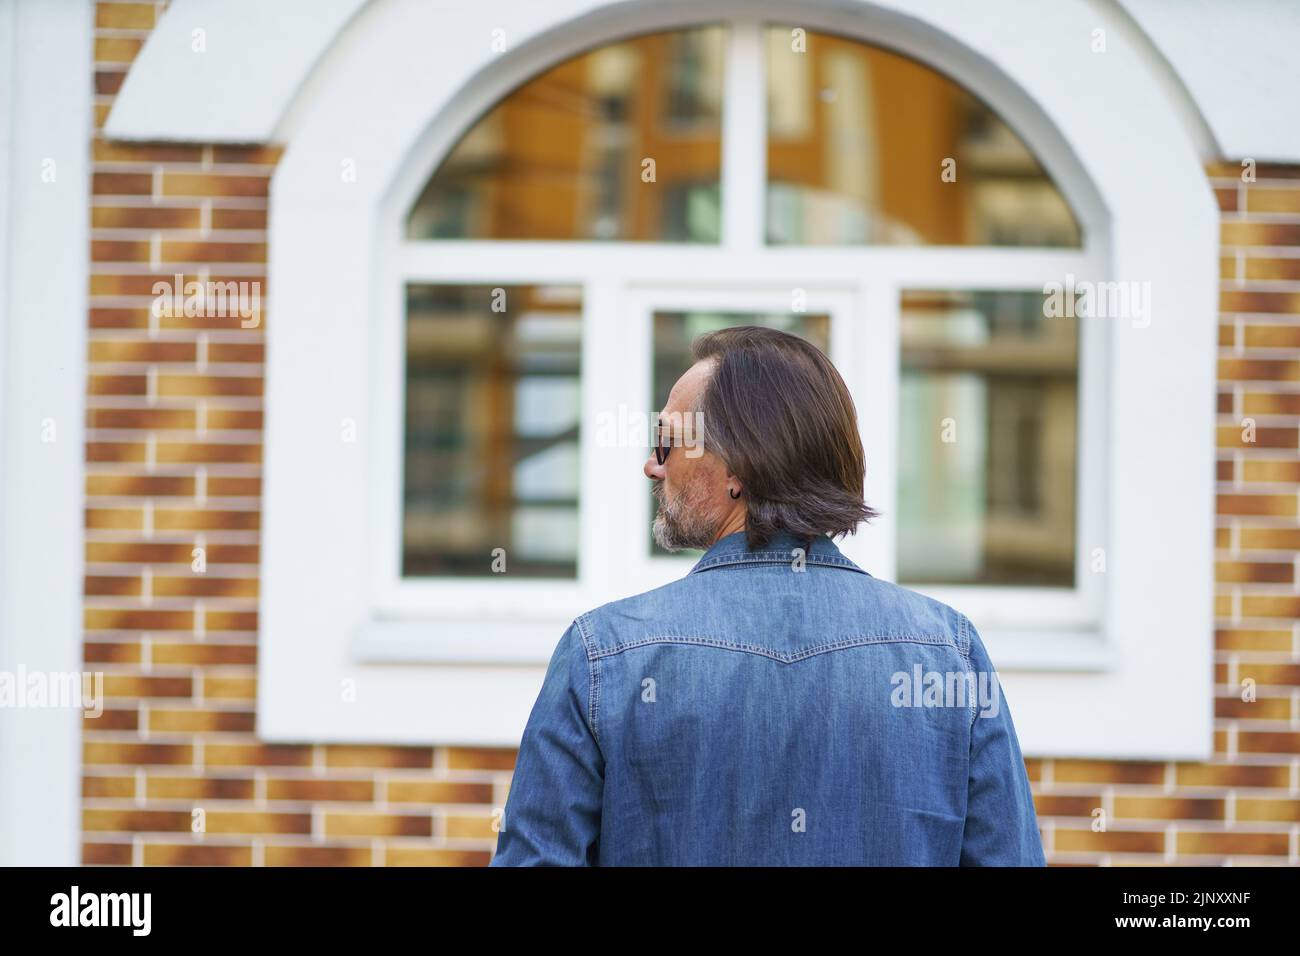 Close up rear view of a man standing alone in front old town building looking sideways while traveling in european cities during vacation time wearing denim jeans shirt. Travel concept.  Stock Photo